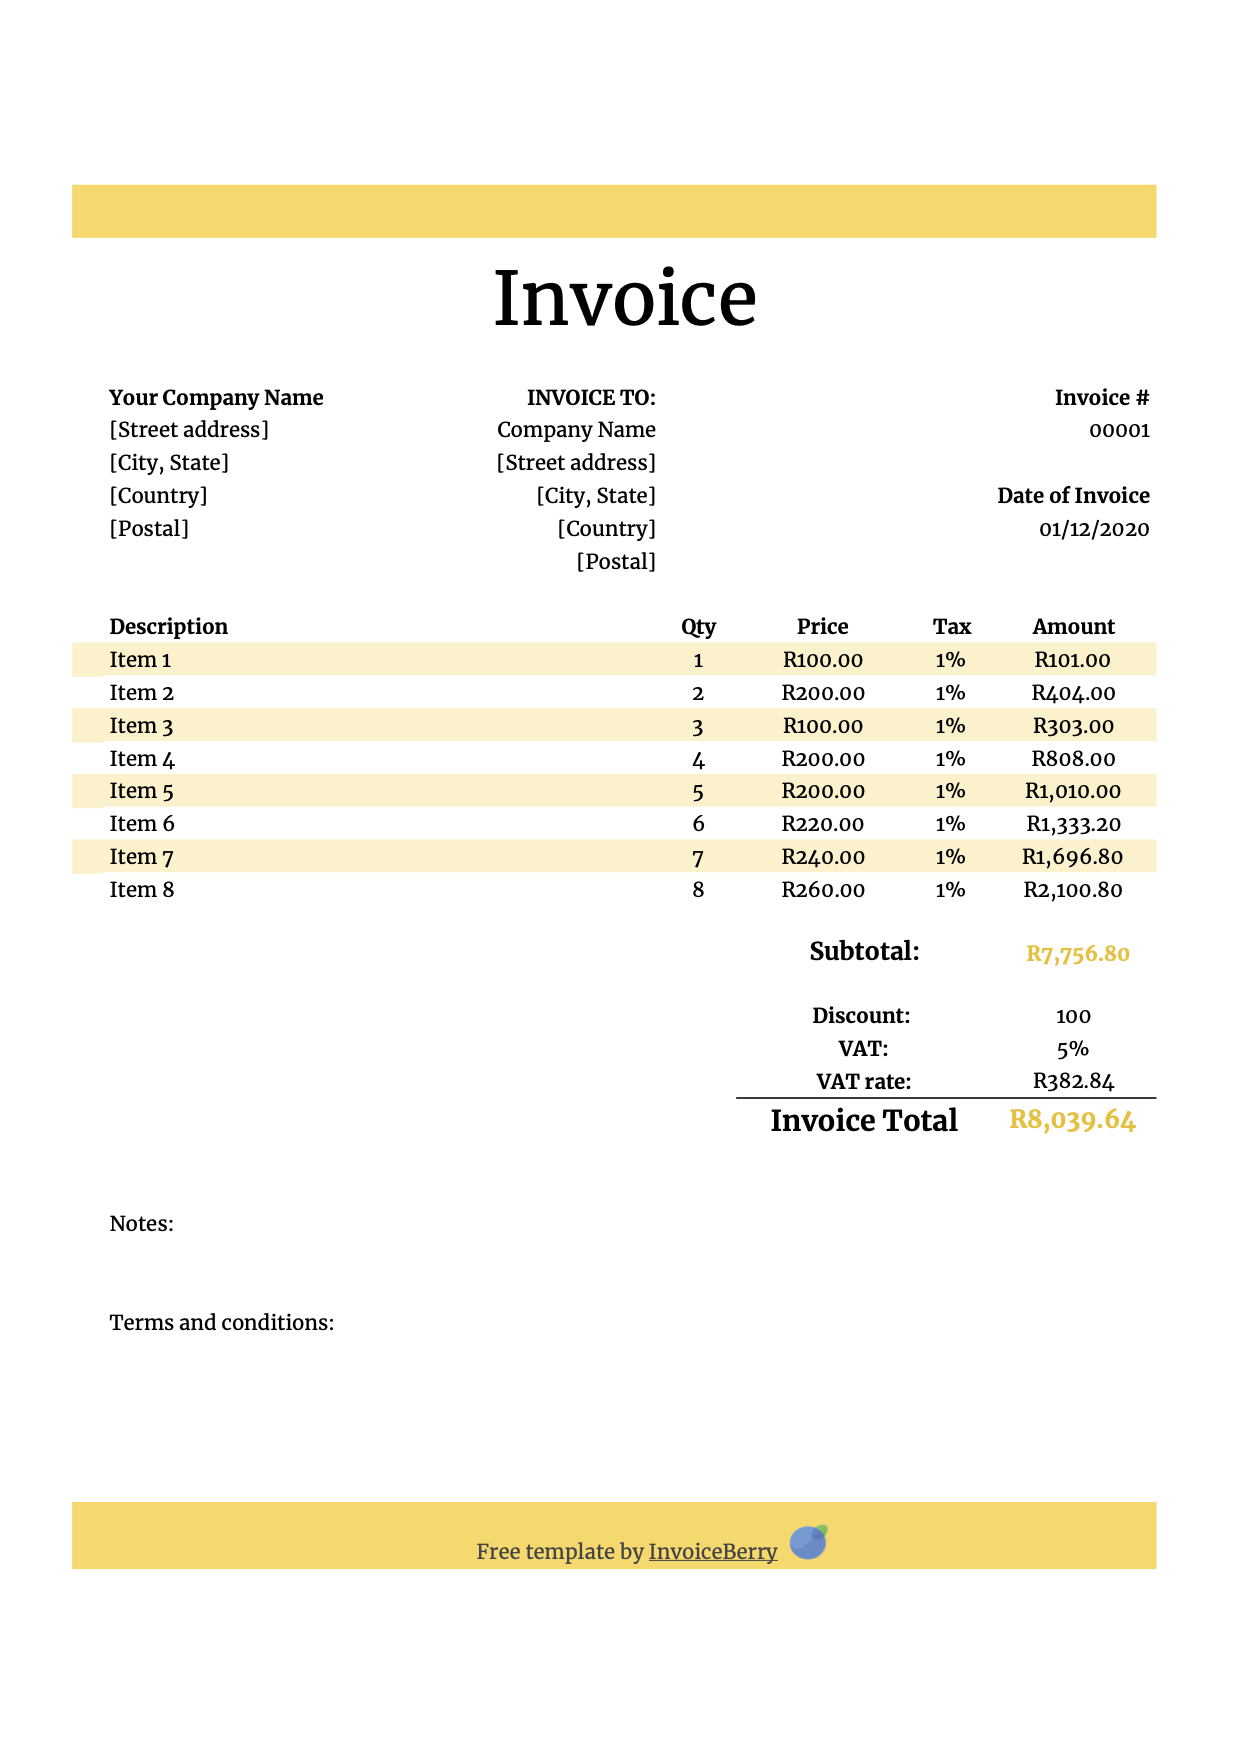 Free Numbers invoice templates - get invoice templates for Mac Pertaining To Free Invoice Template Word Mac